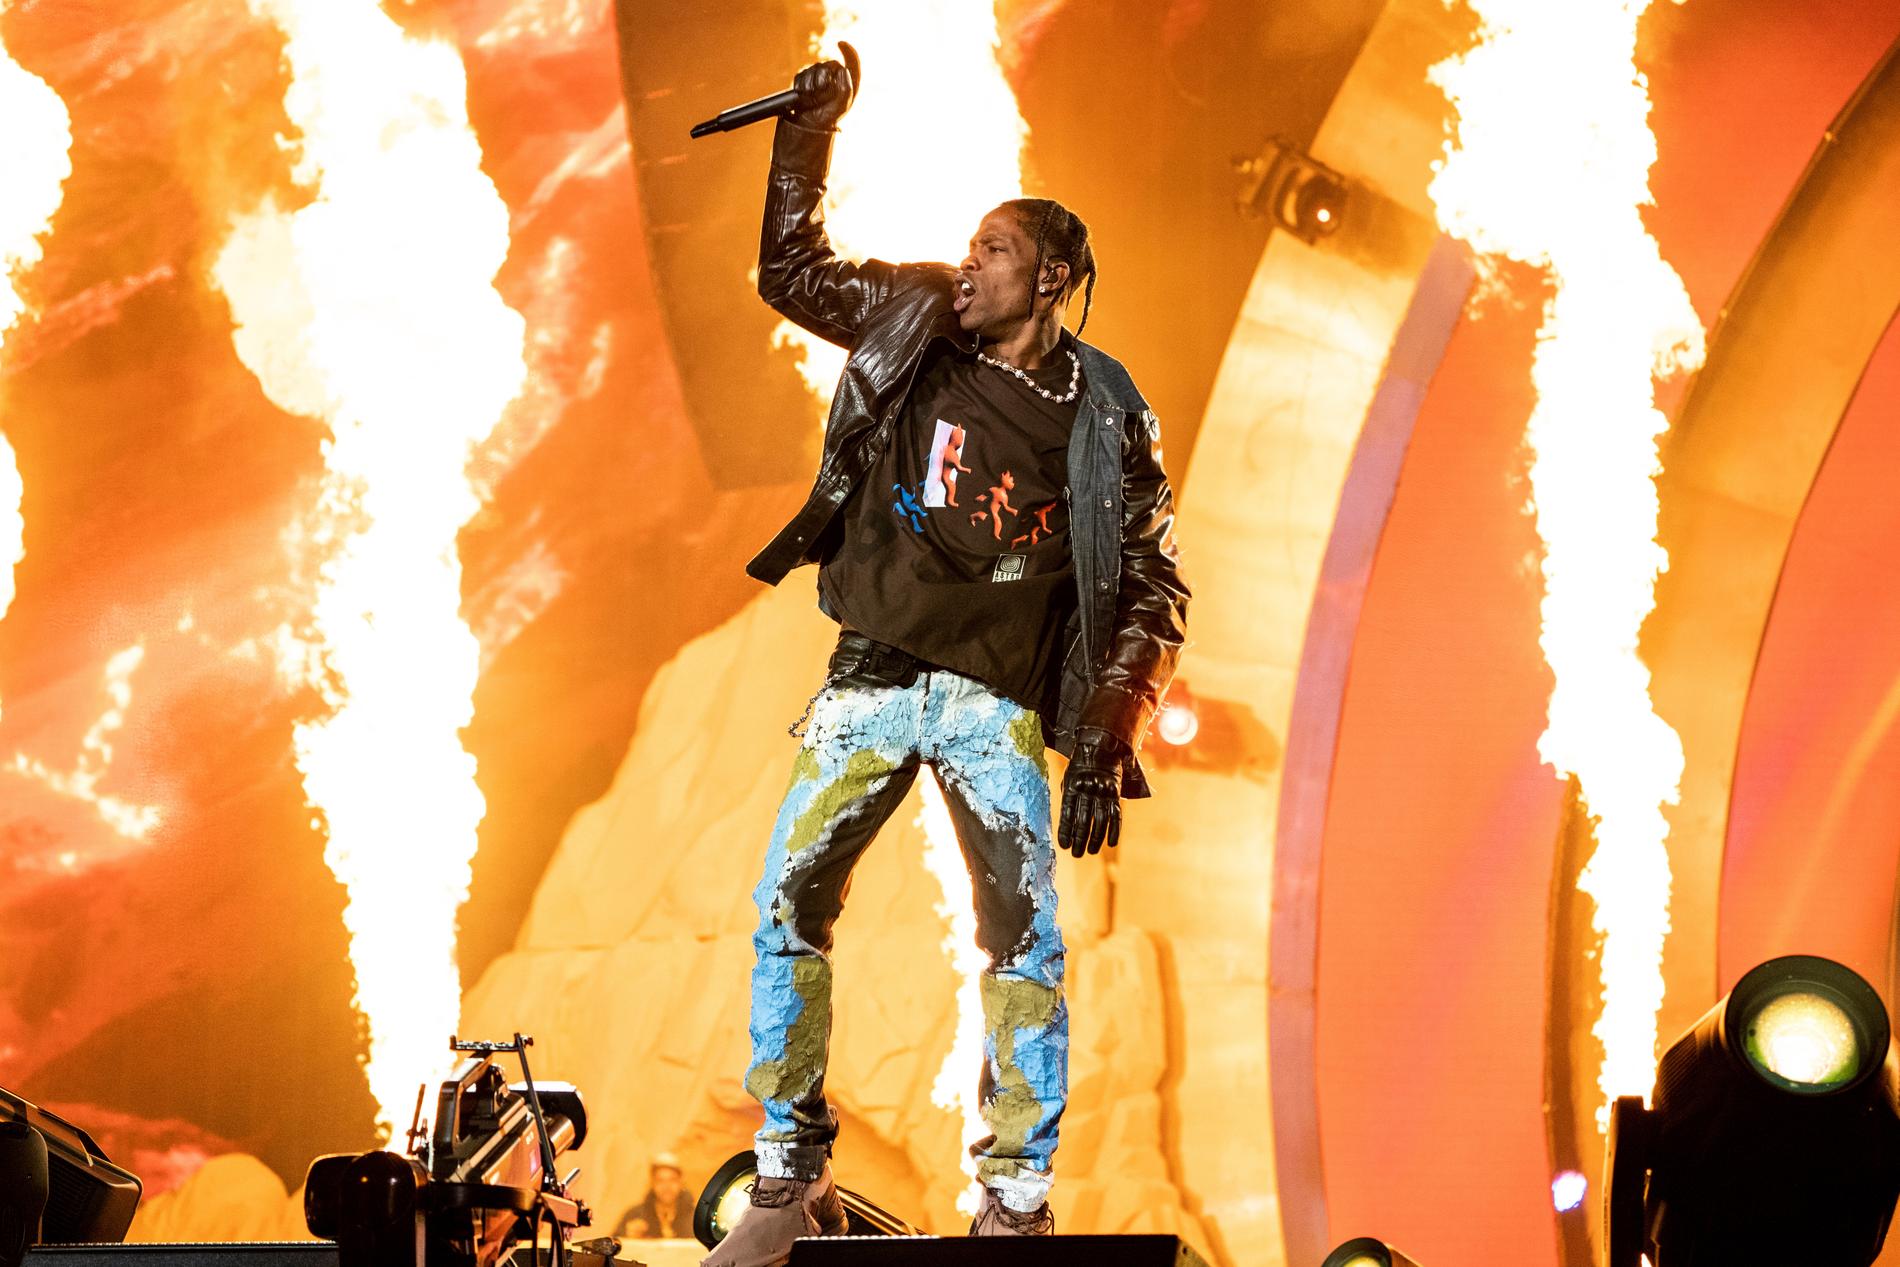 Travis Scott on stage for the first time since Astroworld - VG